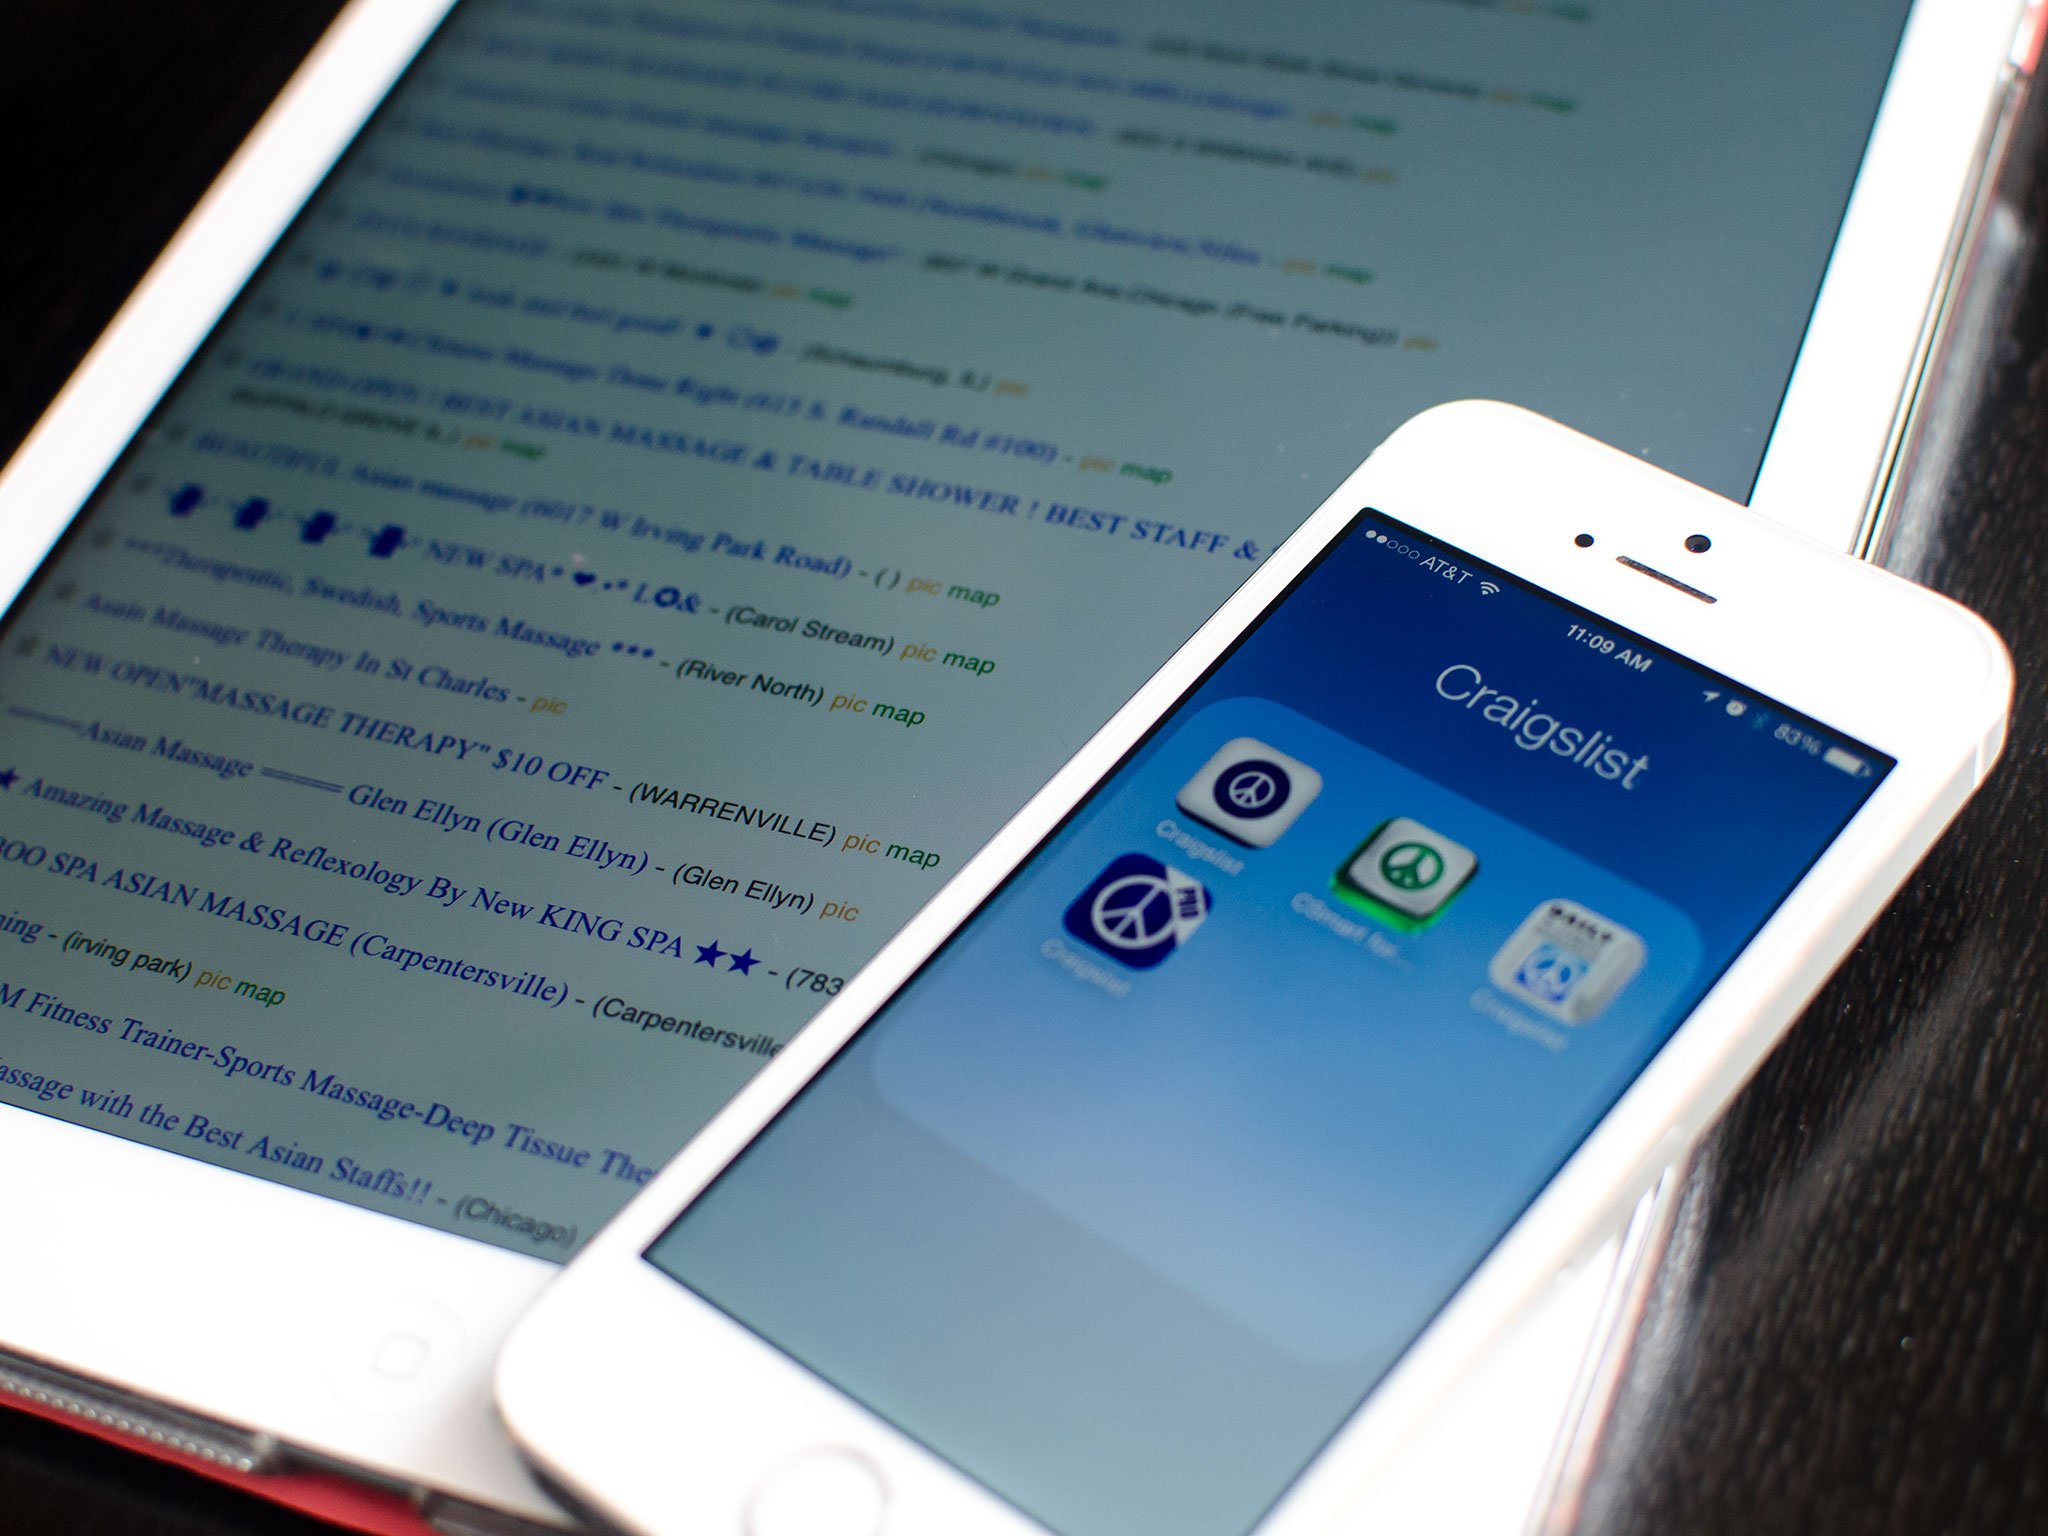 Best Craigslist apps for iPhone and iPad: How to buy and ...